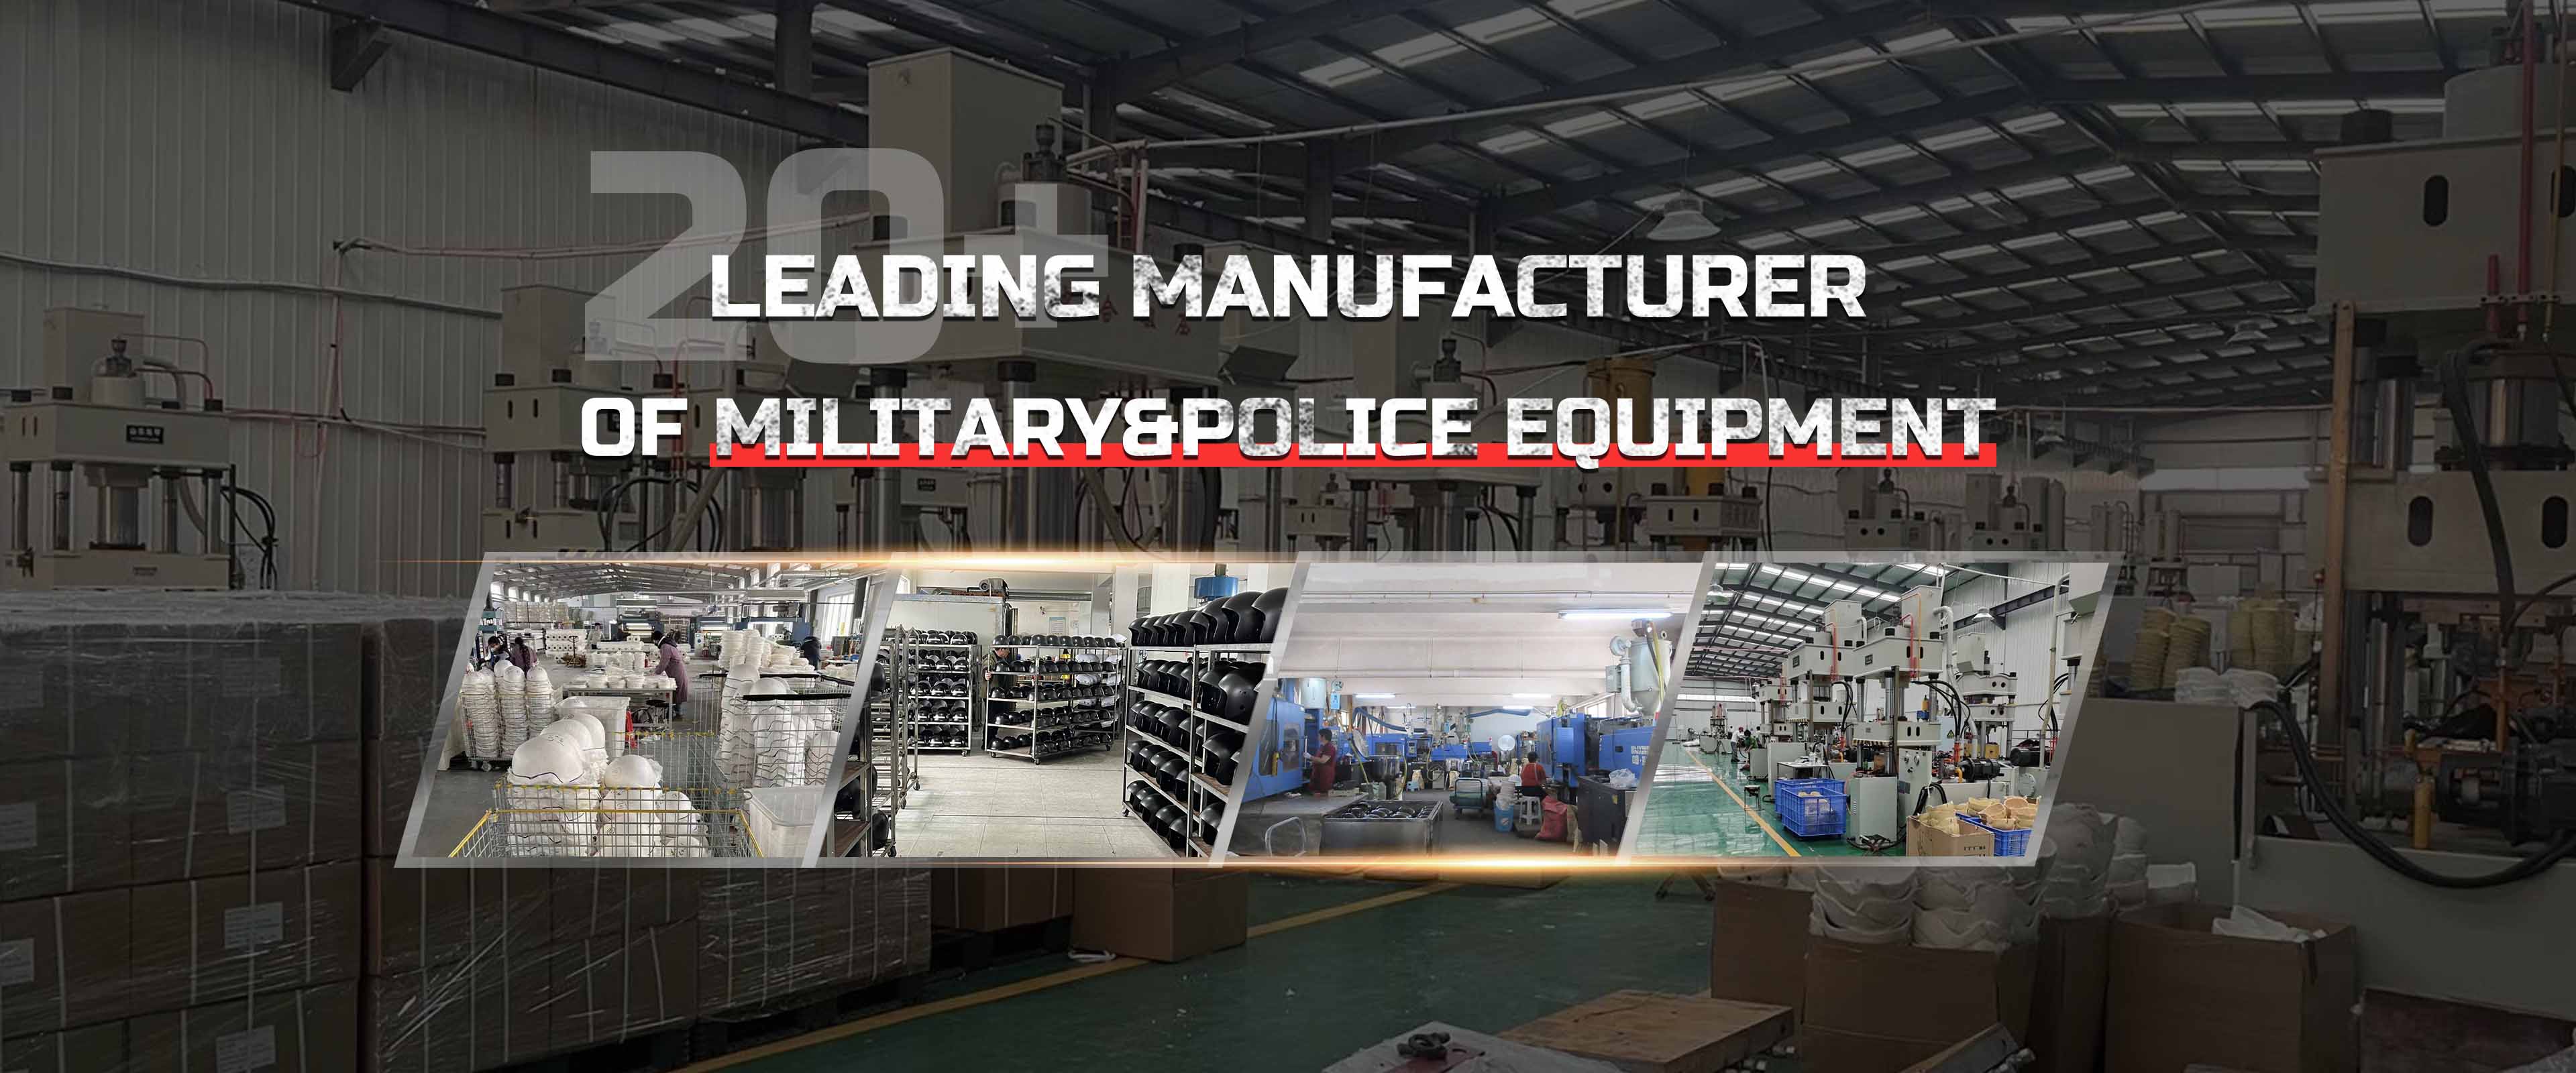 LEADING MANUFACTURER OF MILITARY POLICE EQUIPMENT